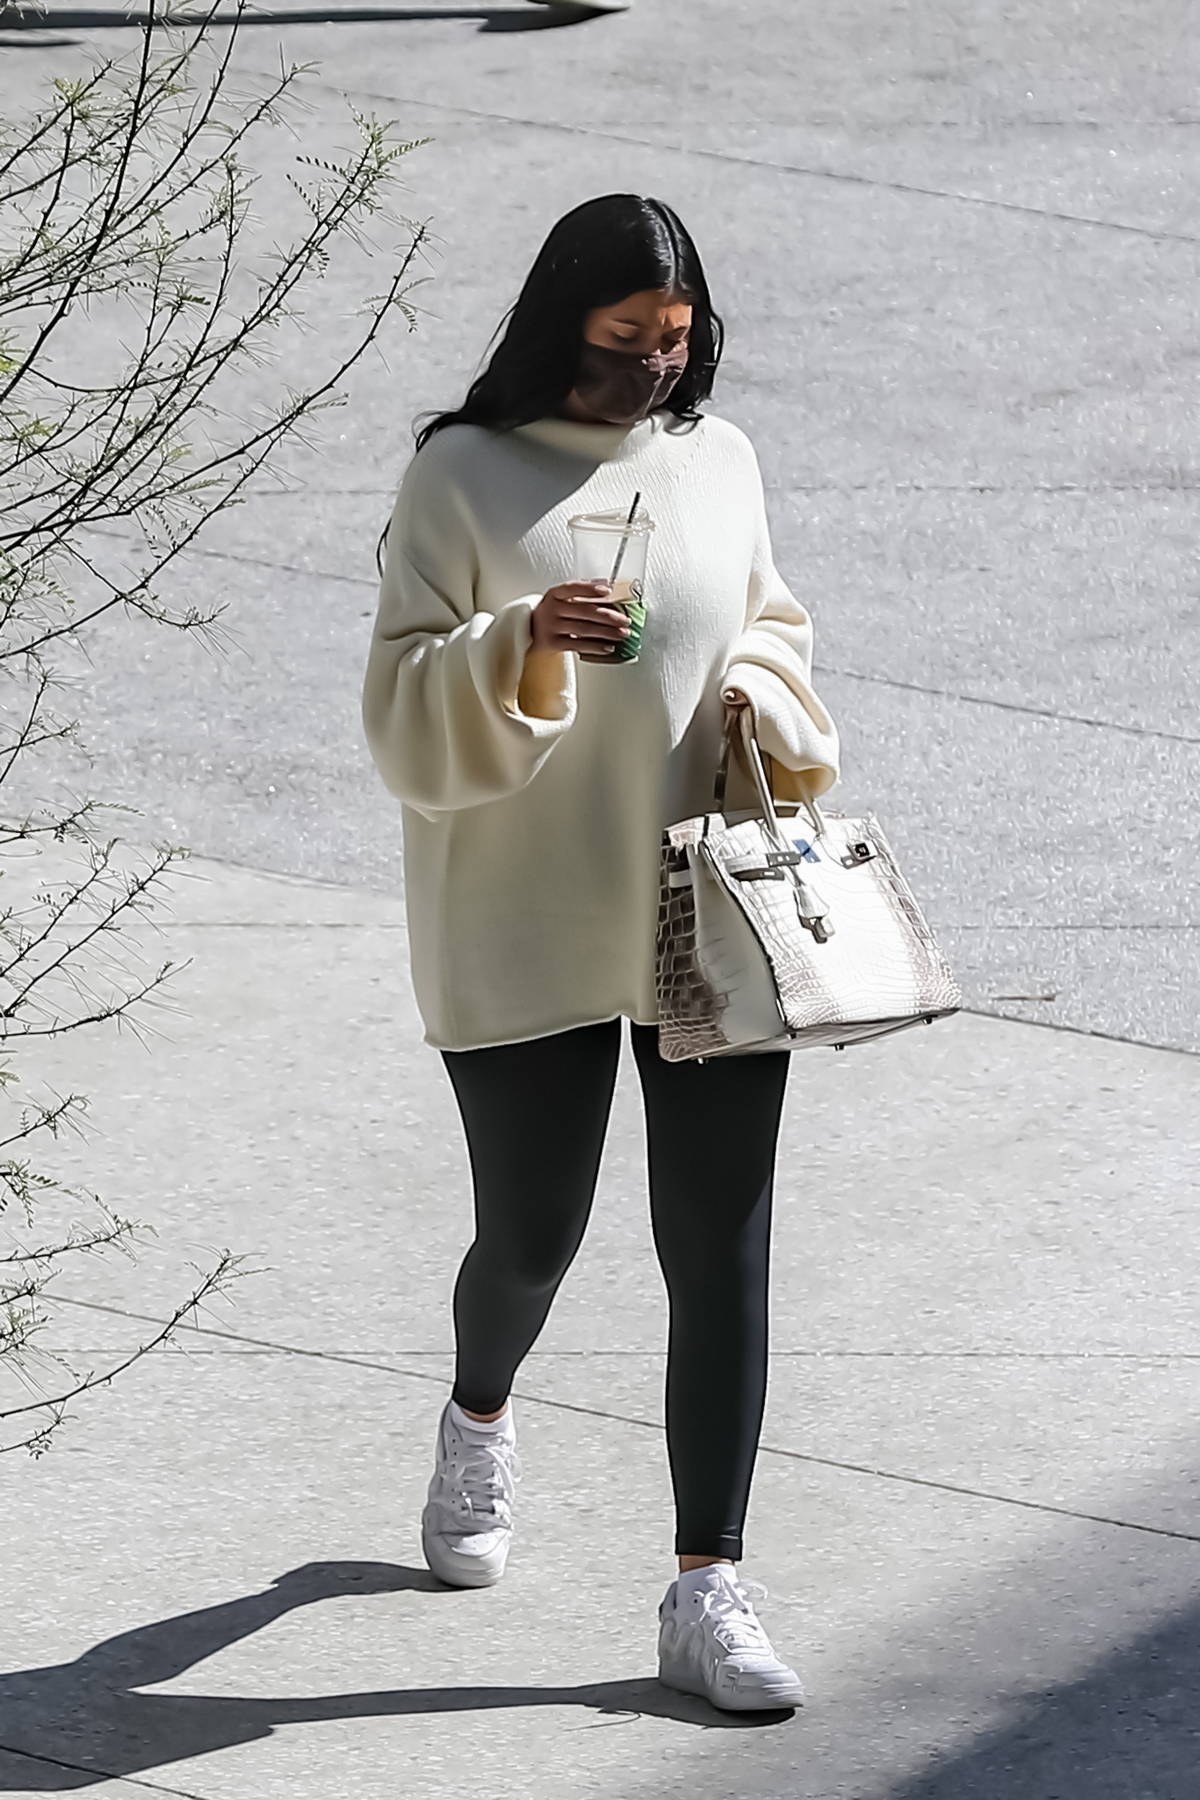 kylie jenner keeps it cozy in an oversized sweater and leggings while out  running errands in los angeles-070322_1